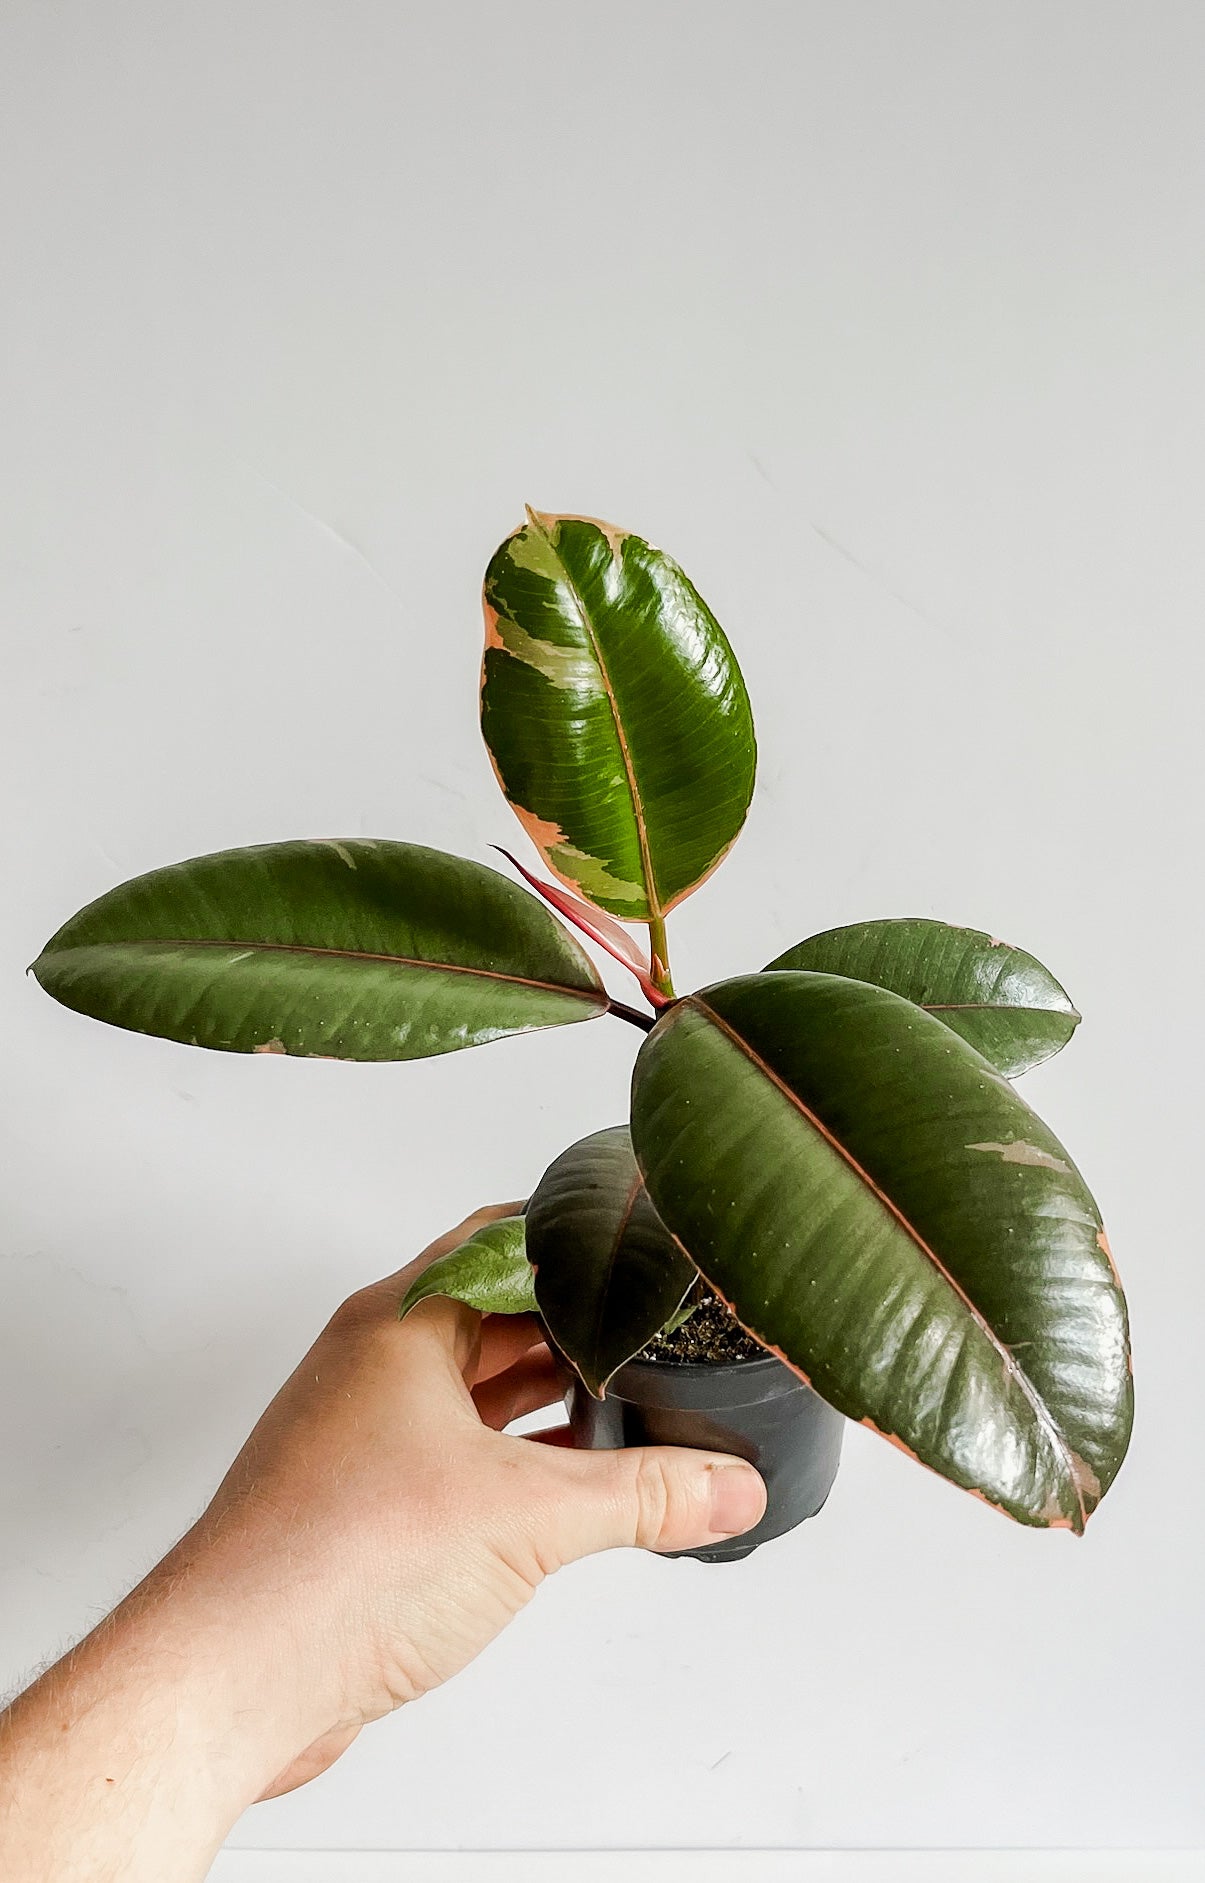 Ficus Elastica 'Ruby Pink' Rubber Tree Plant- Stunning & Vibrant Ruby Pink Variegated Leaves- Tropical Tree Houseplant